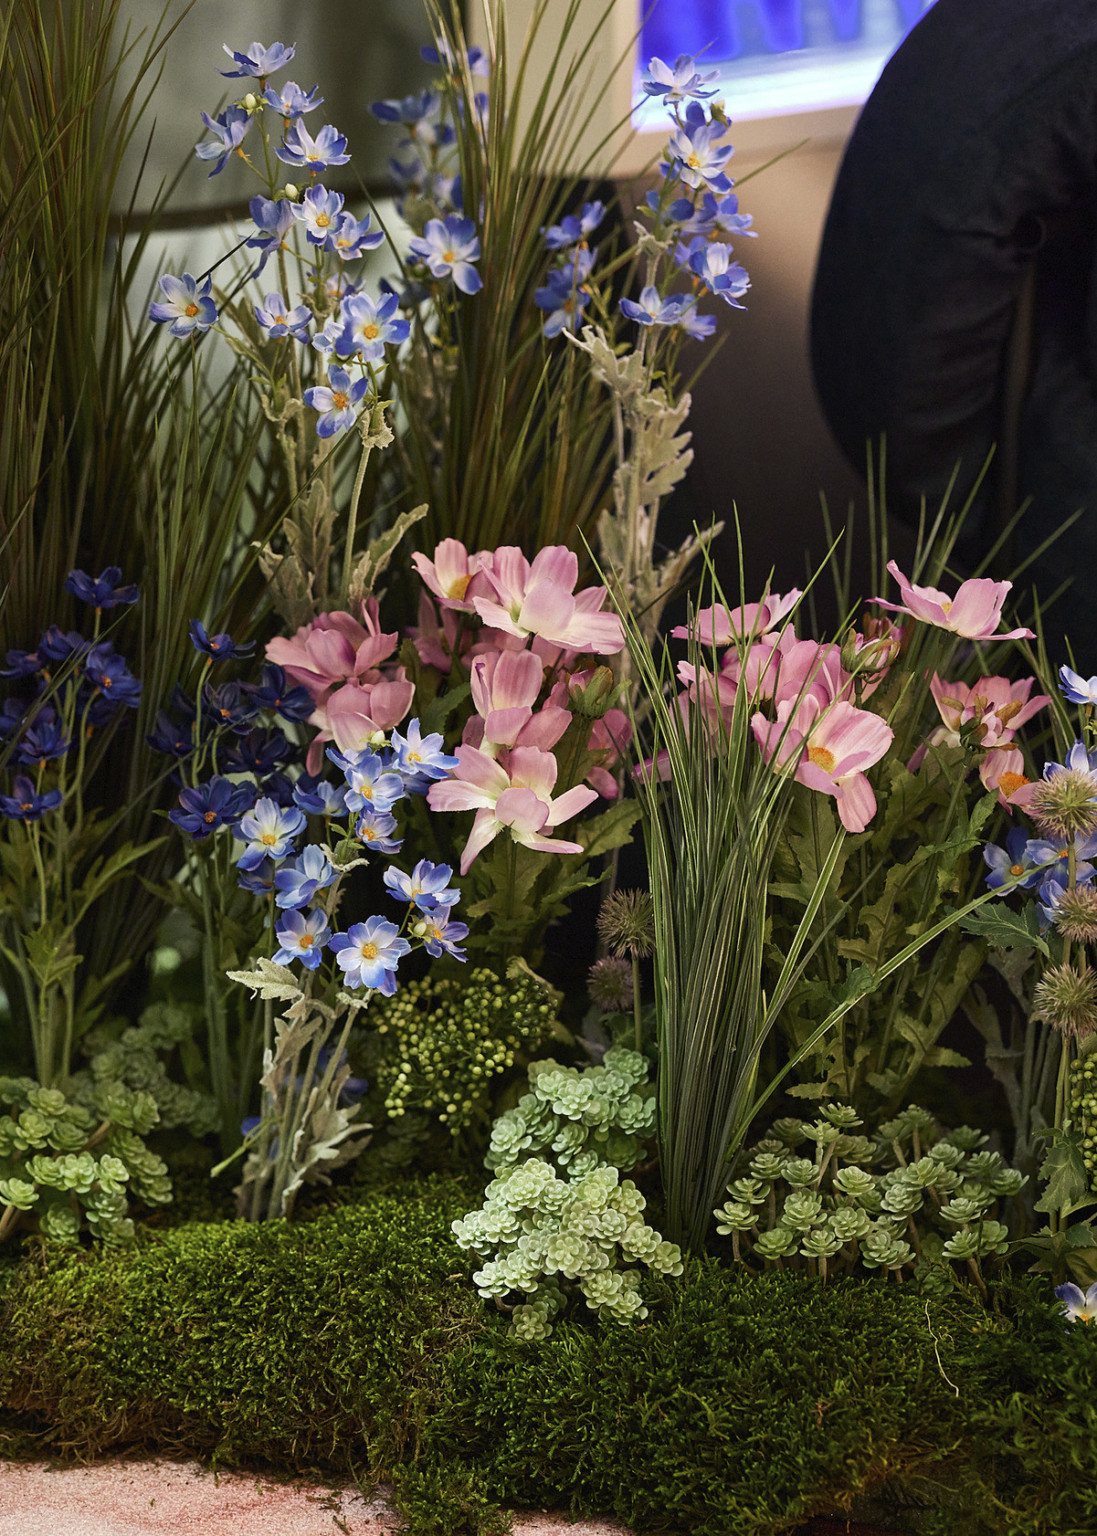 Close up of faux florals placed on ground. Fake flowers in blue, pink, and purple with synthetic moss and grass